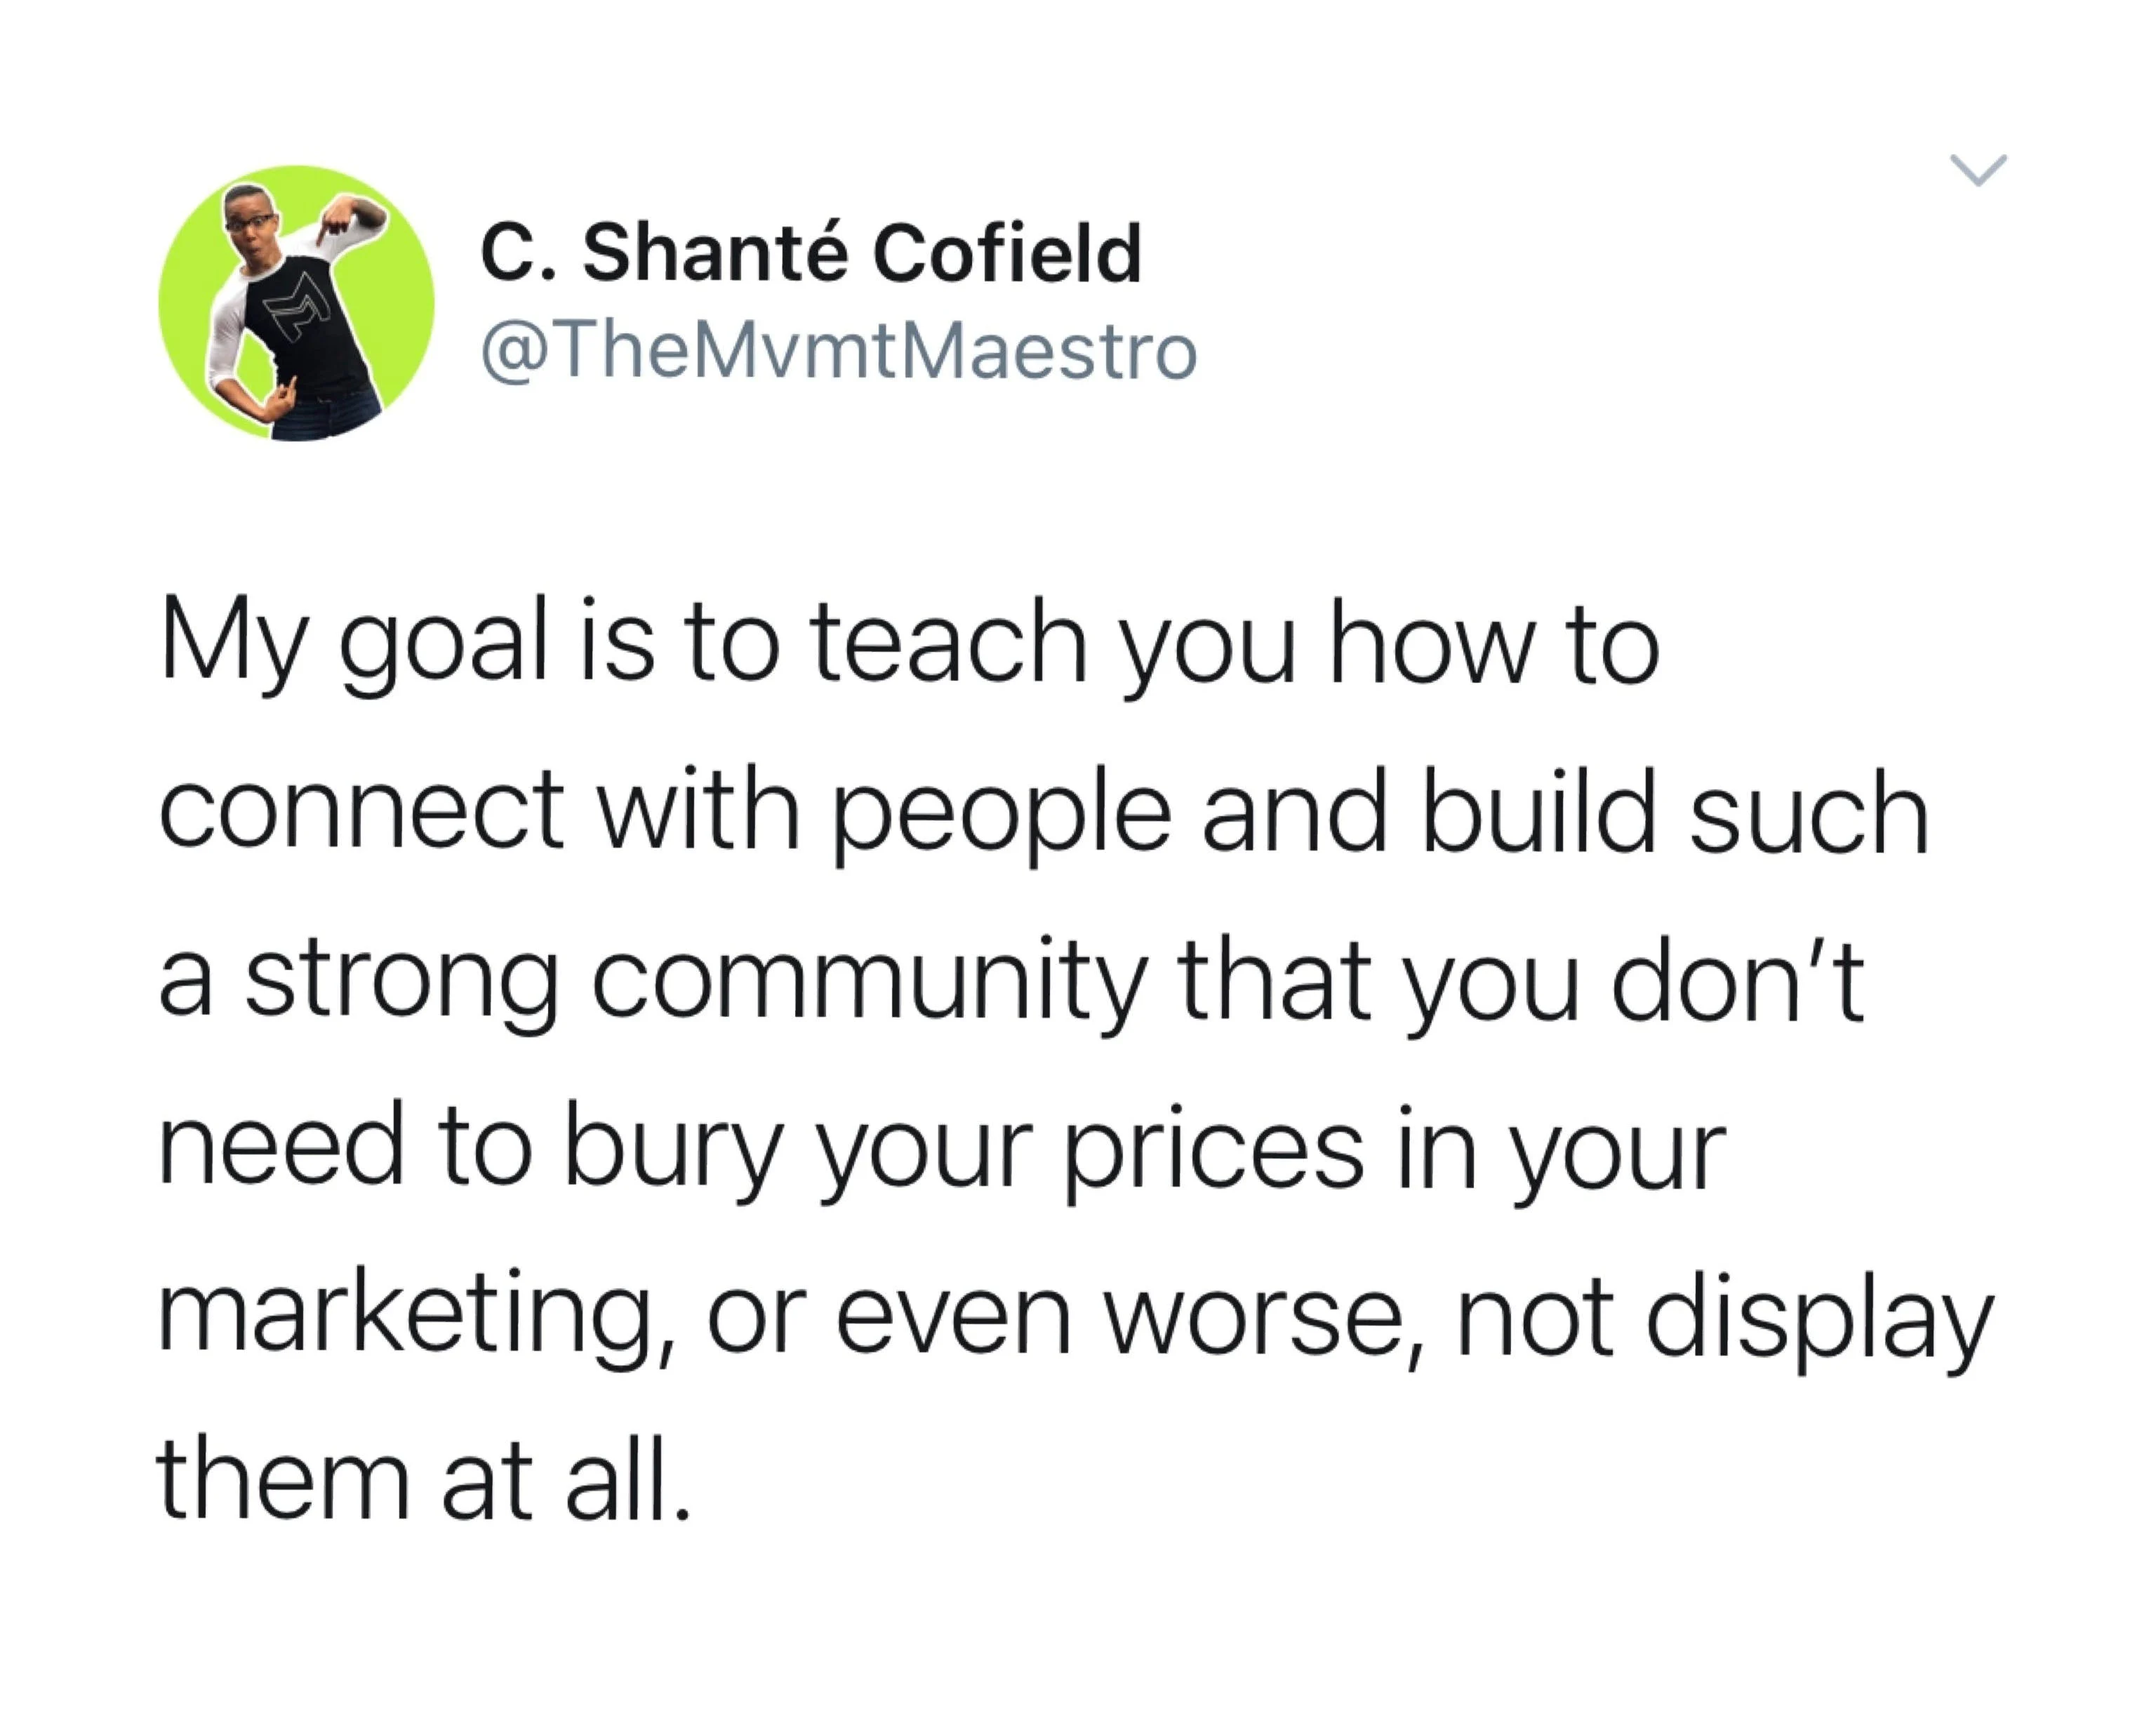 "My goal is to teach you how to connect with people and build such a strong community that you don't need to bury your prices in your marketing, or even worse, not displaying them all."